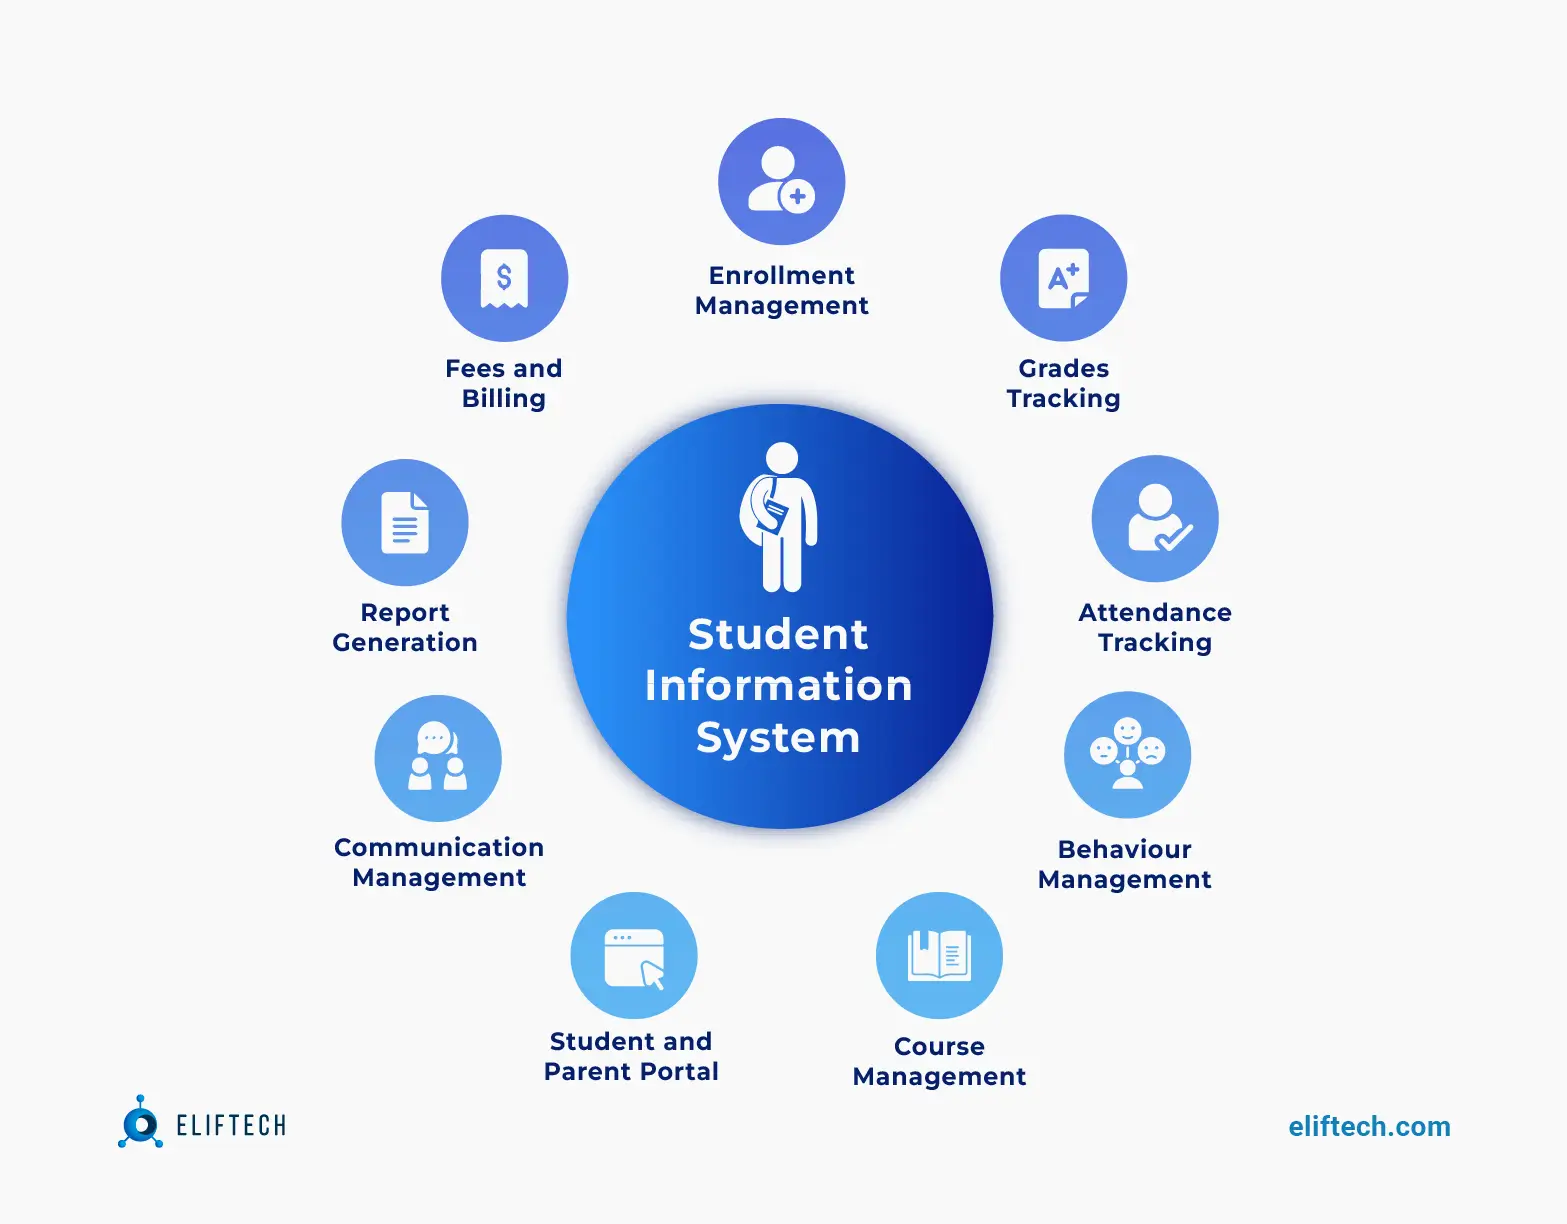 Student Information System (SIS) functions